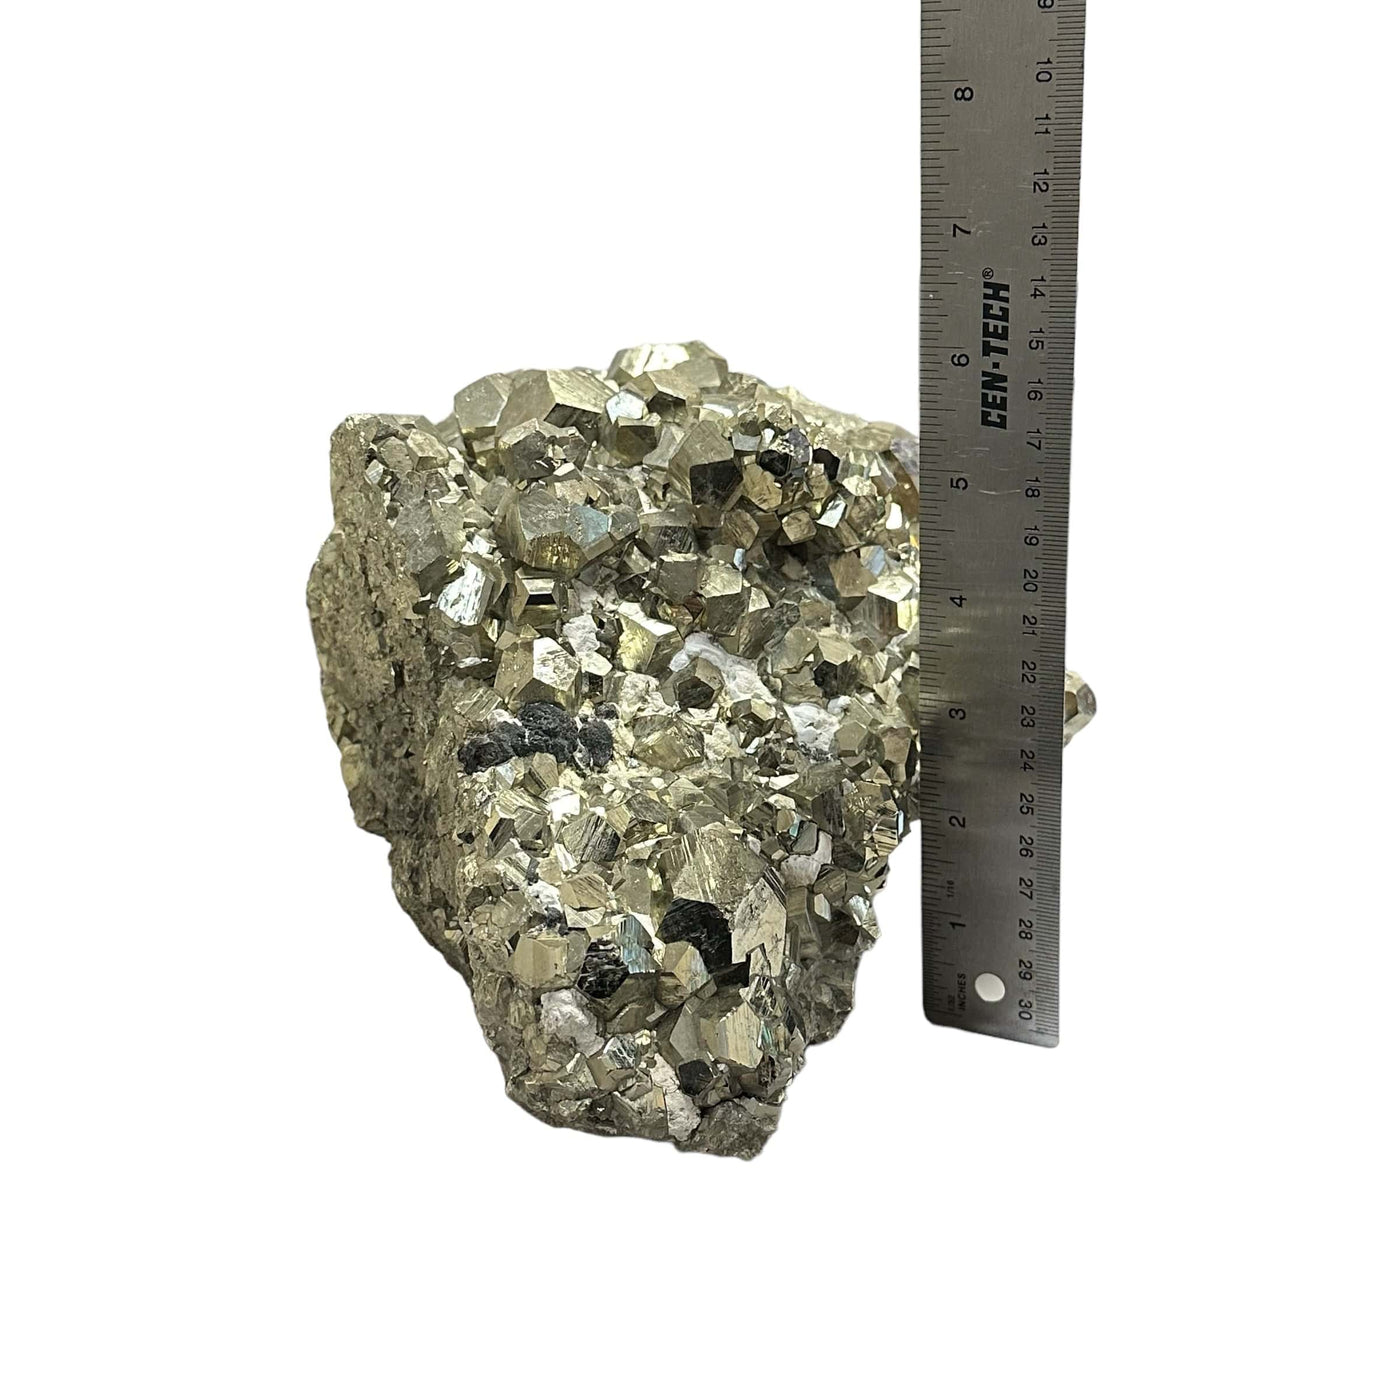 Large Pyrite cluster with Hexagon formations next to a ruler for size reference 